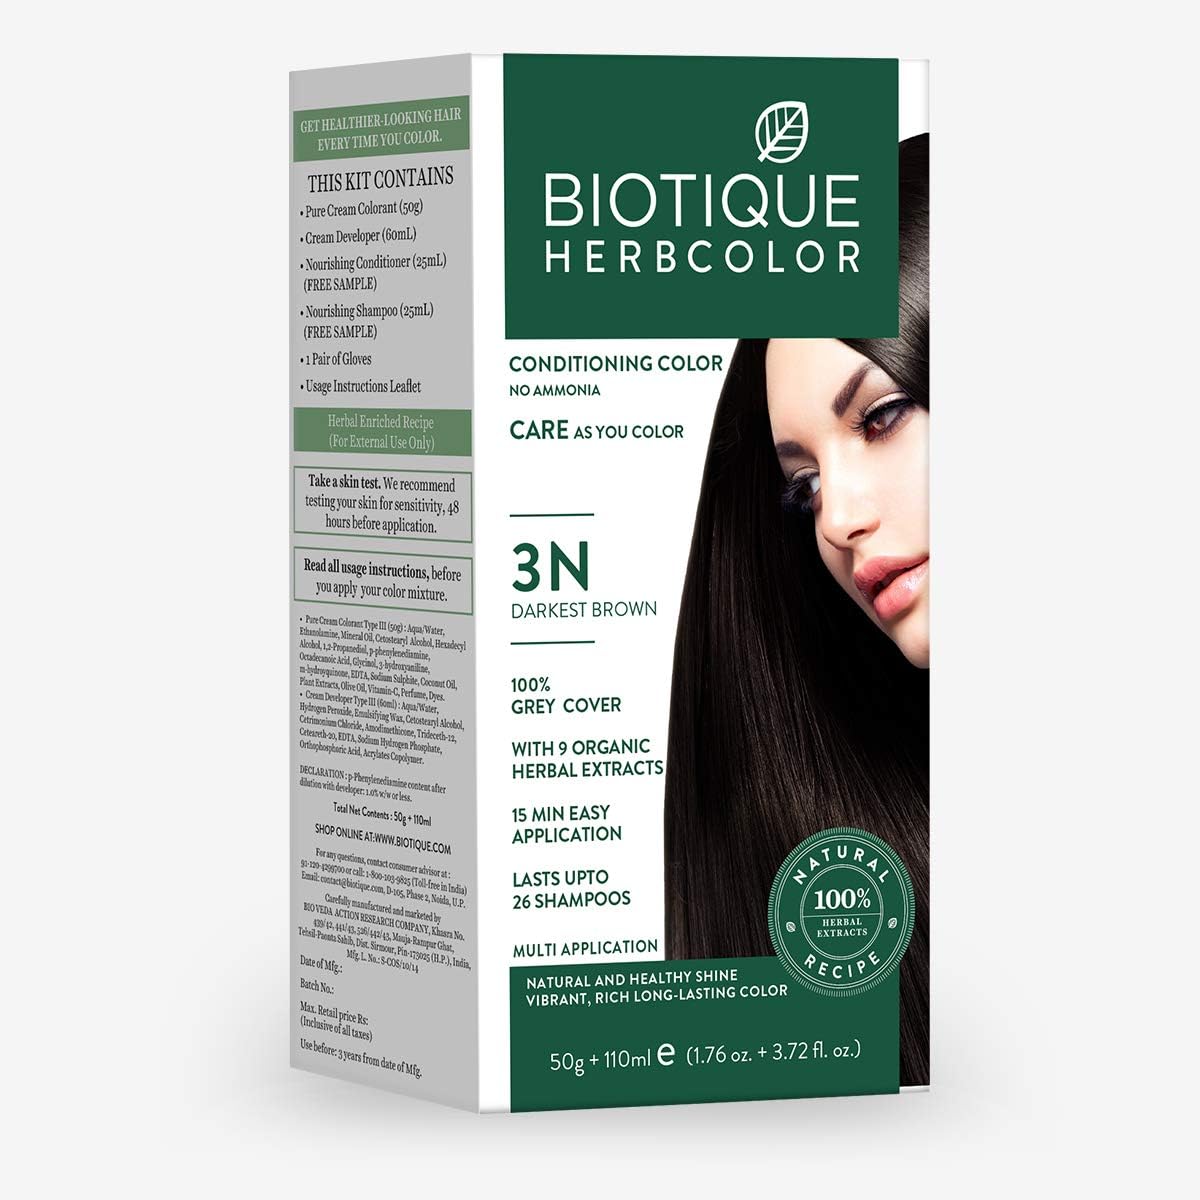 Biotique Bio Herbcolor 3N Darkest Brown Hair Color, 100% Grey Cover, With 9 Organic Herbal Extracts, 50g+110ml